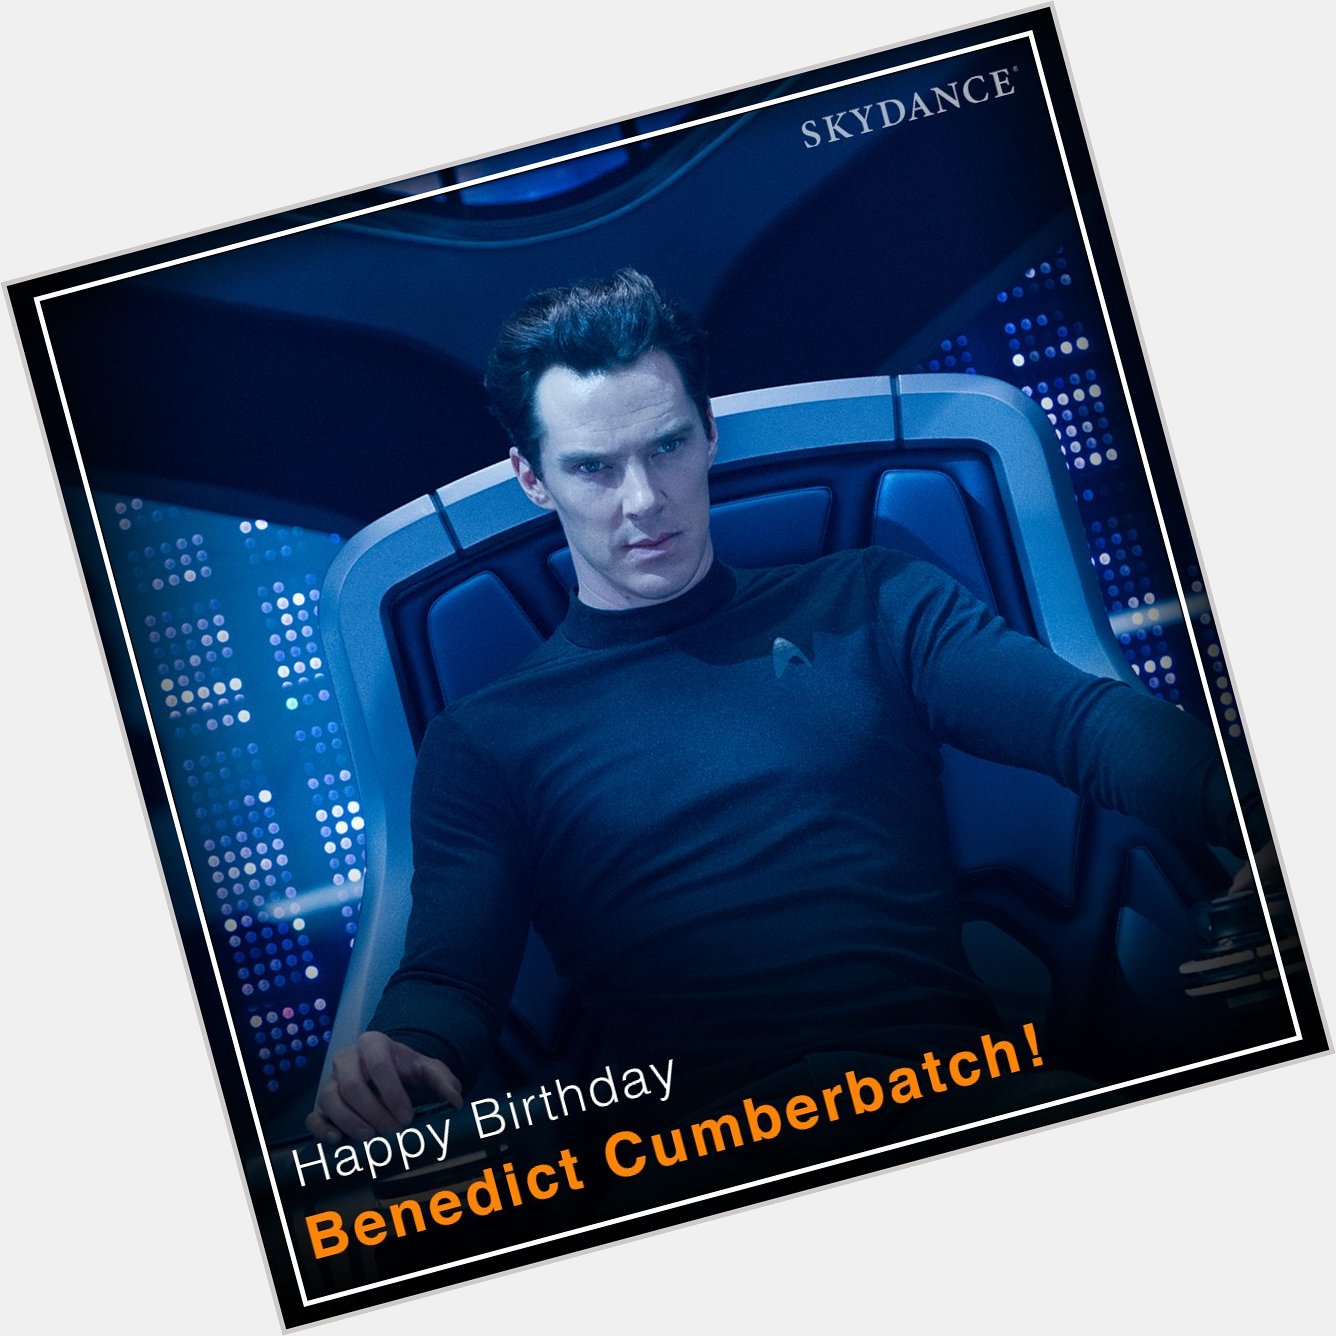 Happy birthday to the superhuman on and off the screen, Benedict Cumberbatch! 